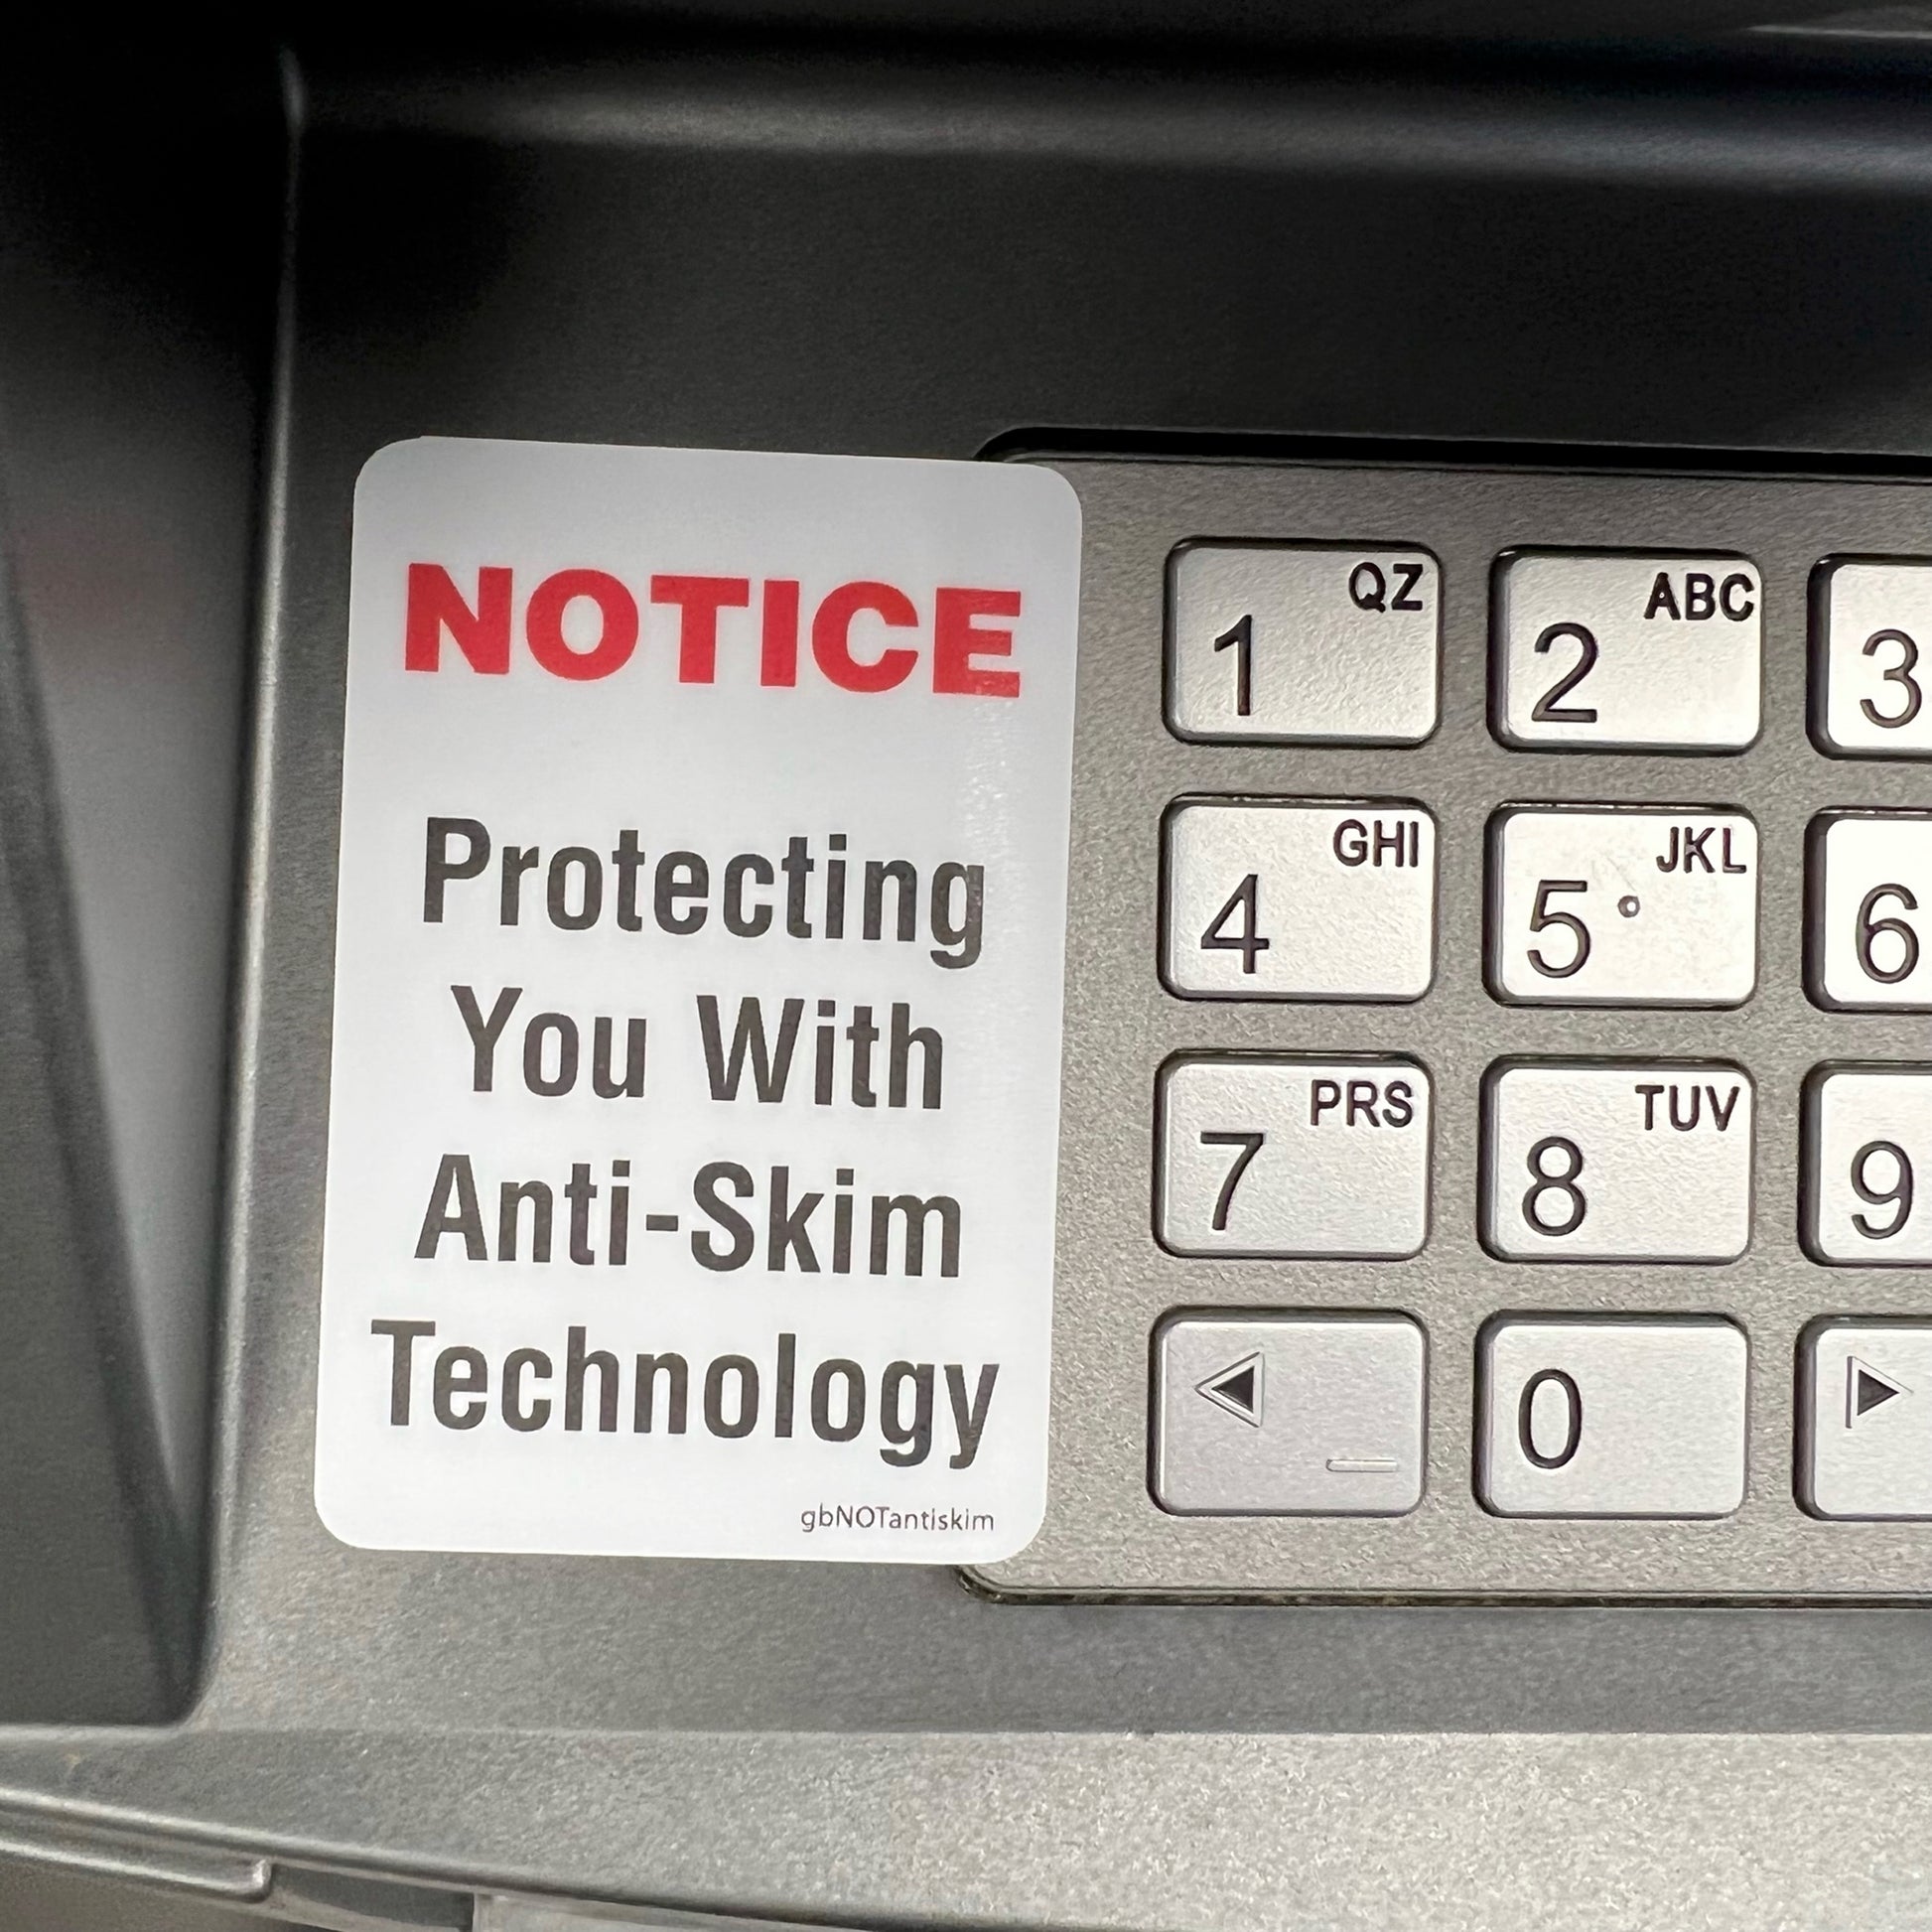 Notice, Protecting with Anti-Skim Technology Decal Image.